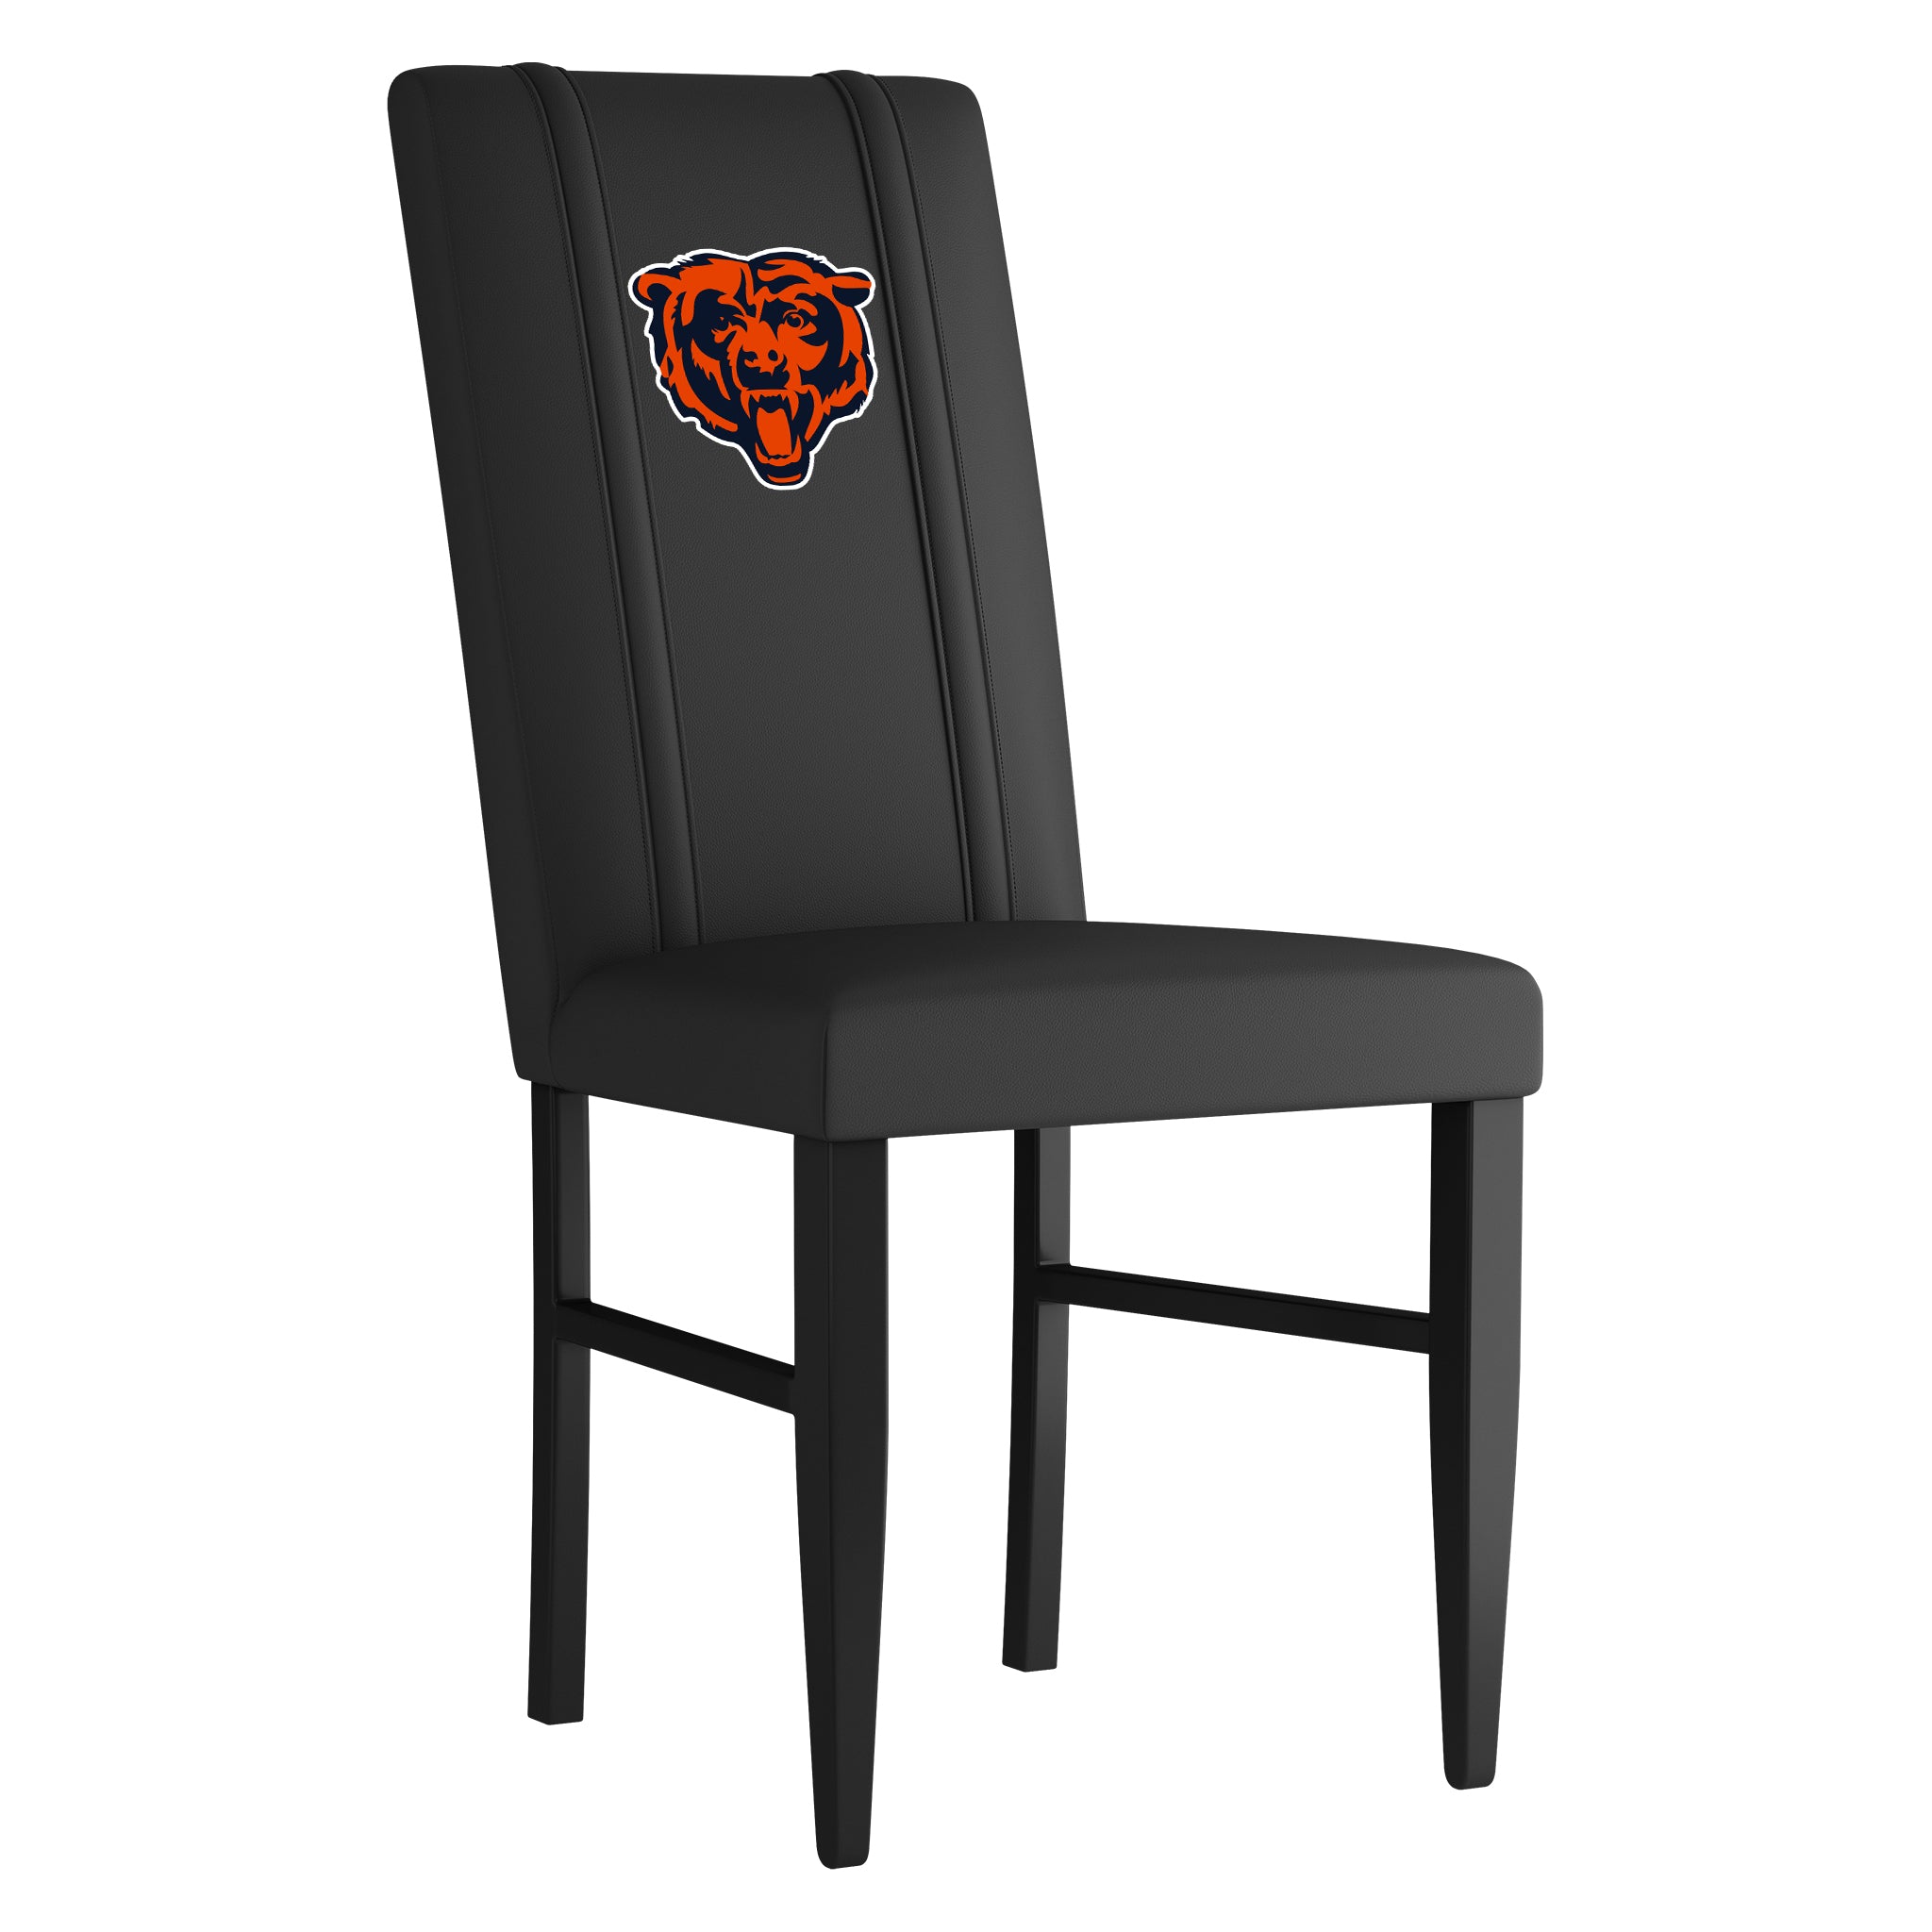 Chicago Bears Side Chair 2000